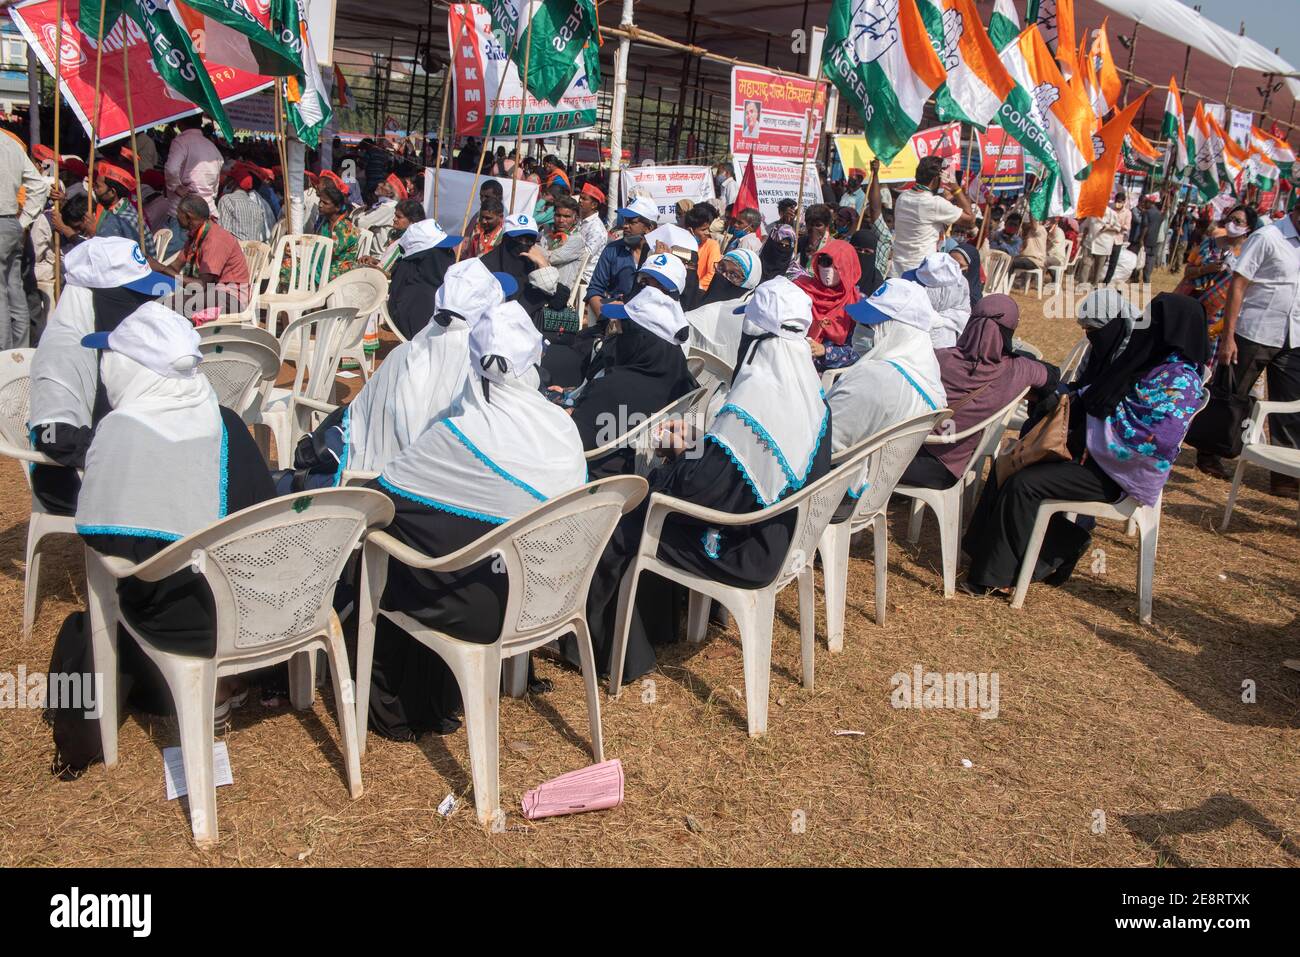 Mumbai , India - 25 January 2021, Muslim woman activists protesters in a black burqa hold up indian flag and signs sitting   near pandal in a rally at Stock Photo